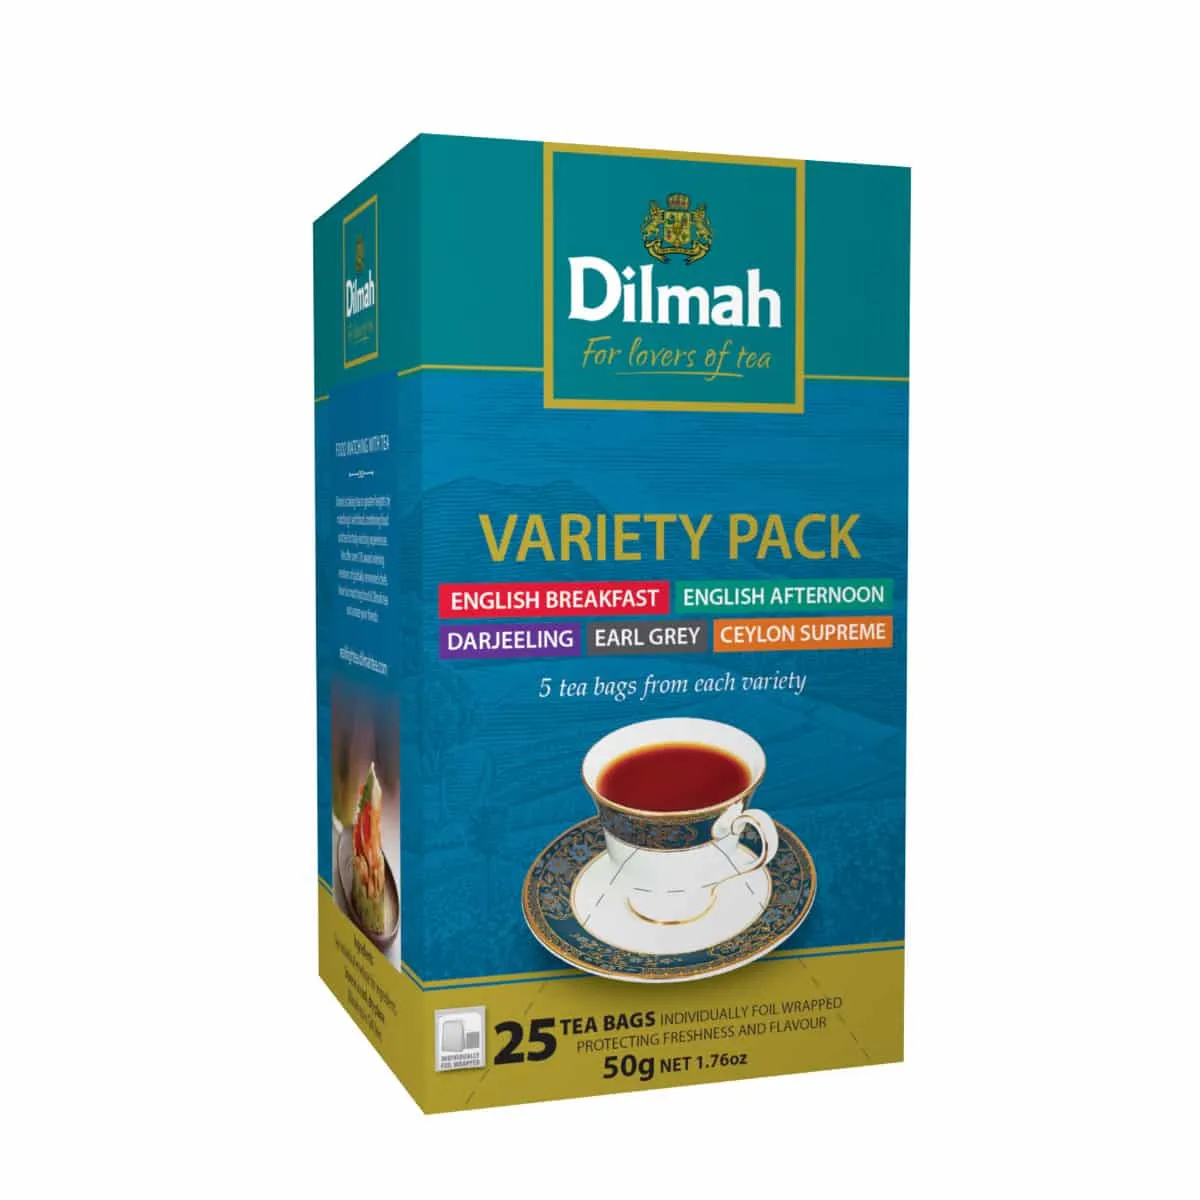 Variety Pack of 25 individually wrapped tea bags, 5 for each flavour.